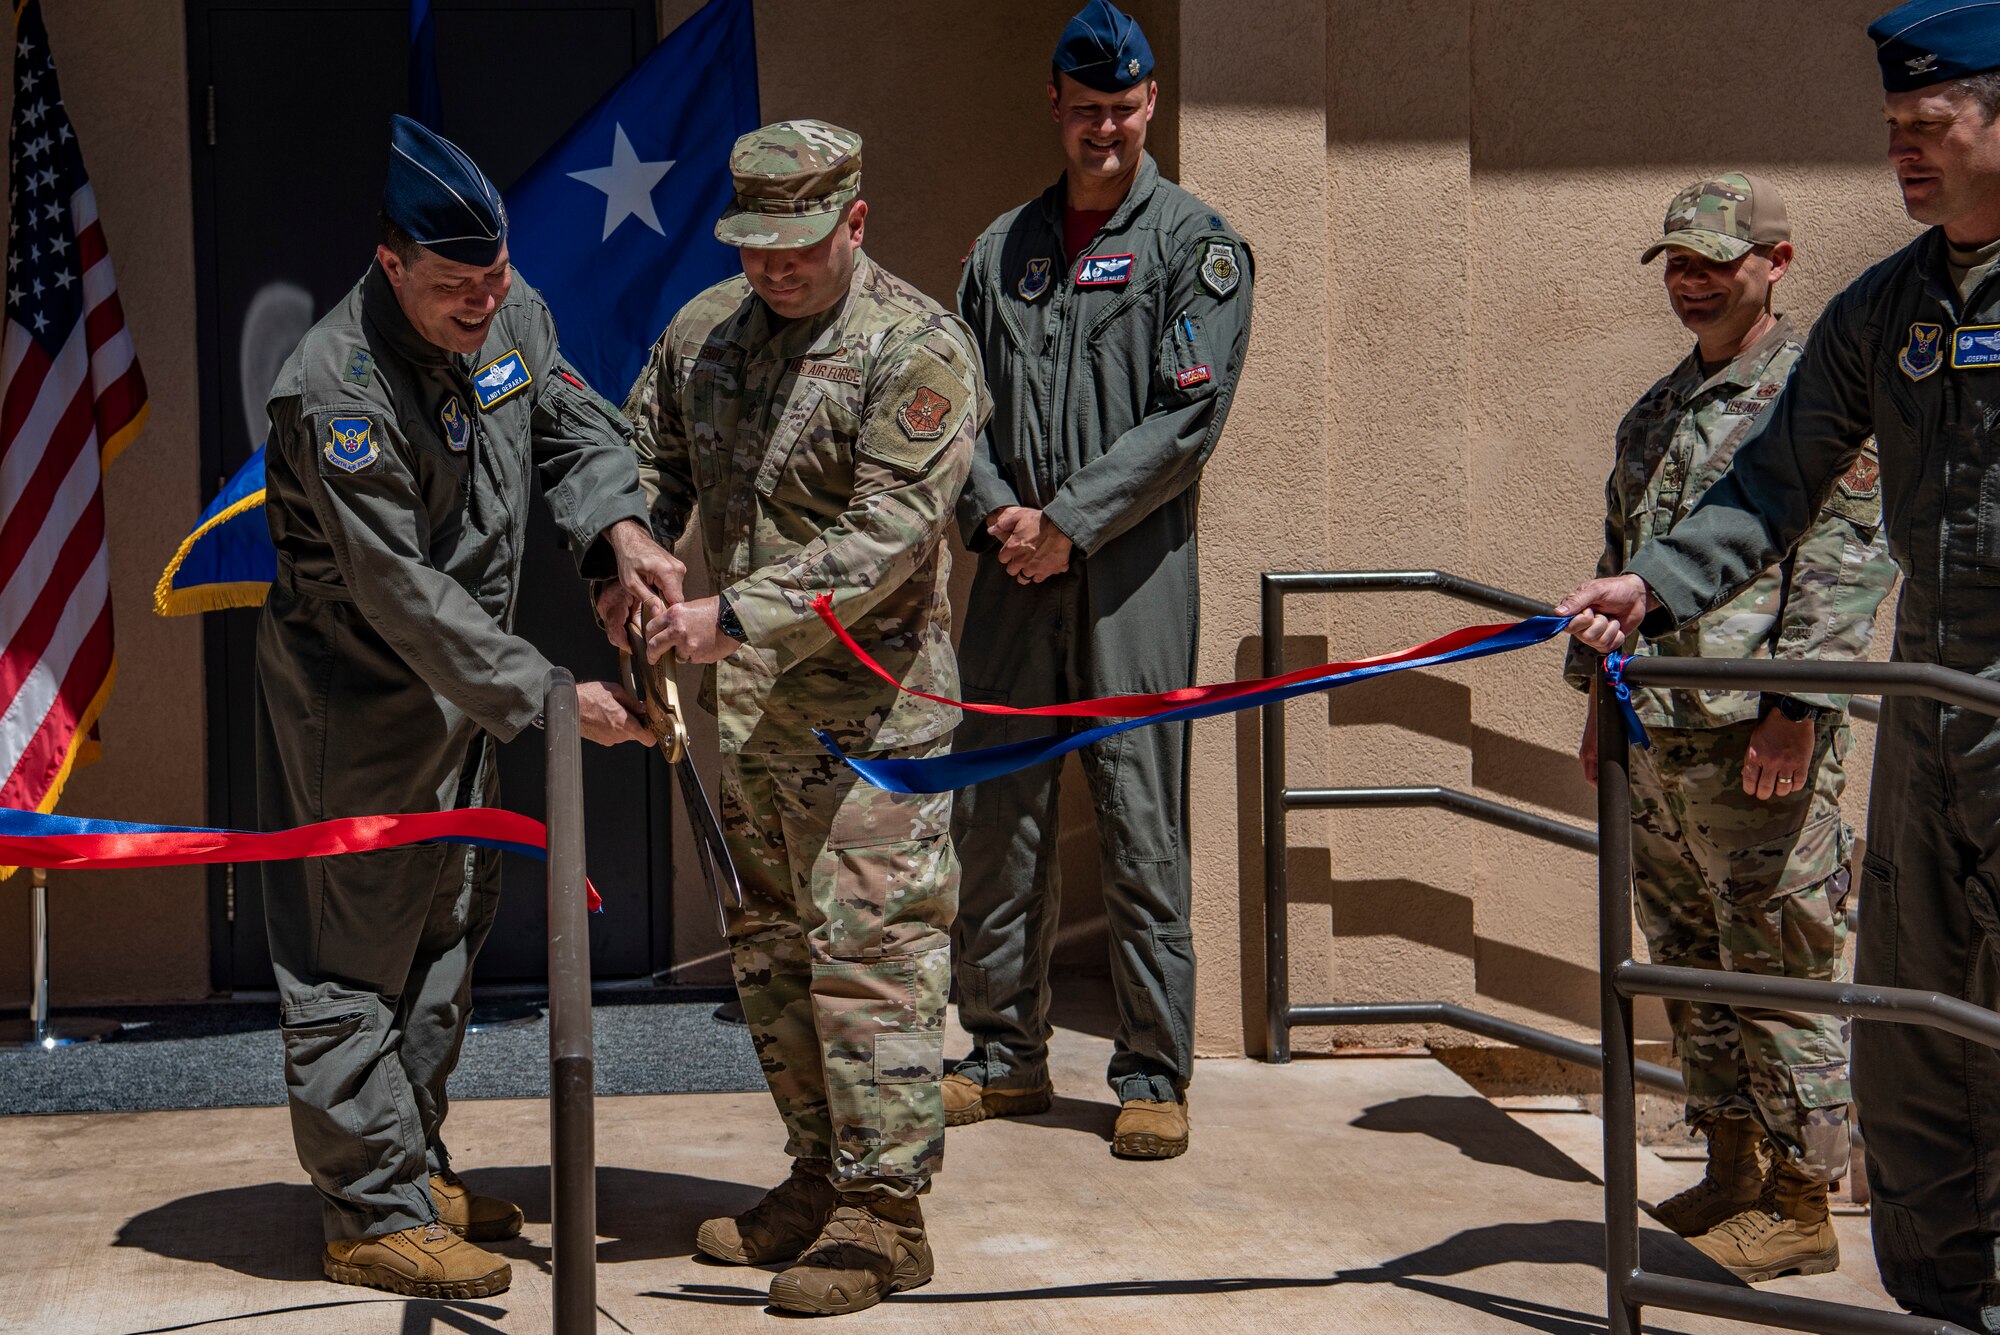 Maj. Gen. Andrew Gebara, 8th Air Force and Joint-Global Strike Operations Center commander, cuts the ribbon with Chief Master Sgt. Steve Cenov, 8th Air Force command chief and J-GSOC senior enlisted leader, during the mission planning building ribbon cutting at Dyess Air Force Base, Texas, April 29, 2022. The 8th Air Force command team leads one of the two active duty numbered air forces in Air Force Global Strike Command and provides strategic deterrence through airpower. (U.S. Air Force photo by Airman 1st Class Ryan Hayman)